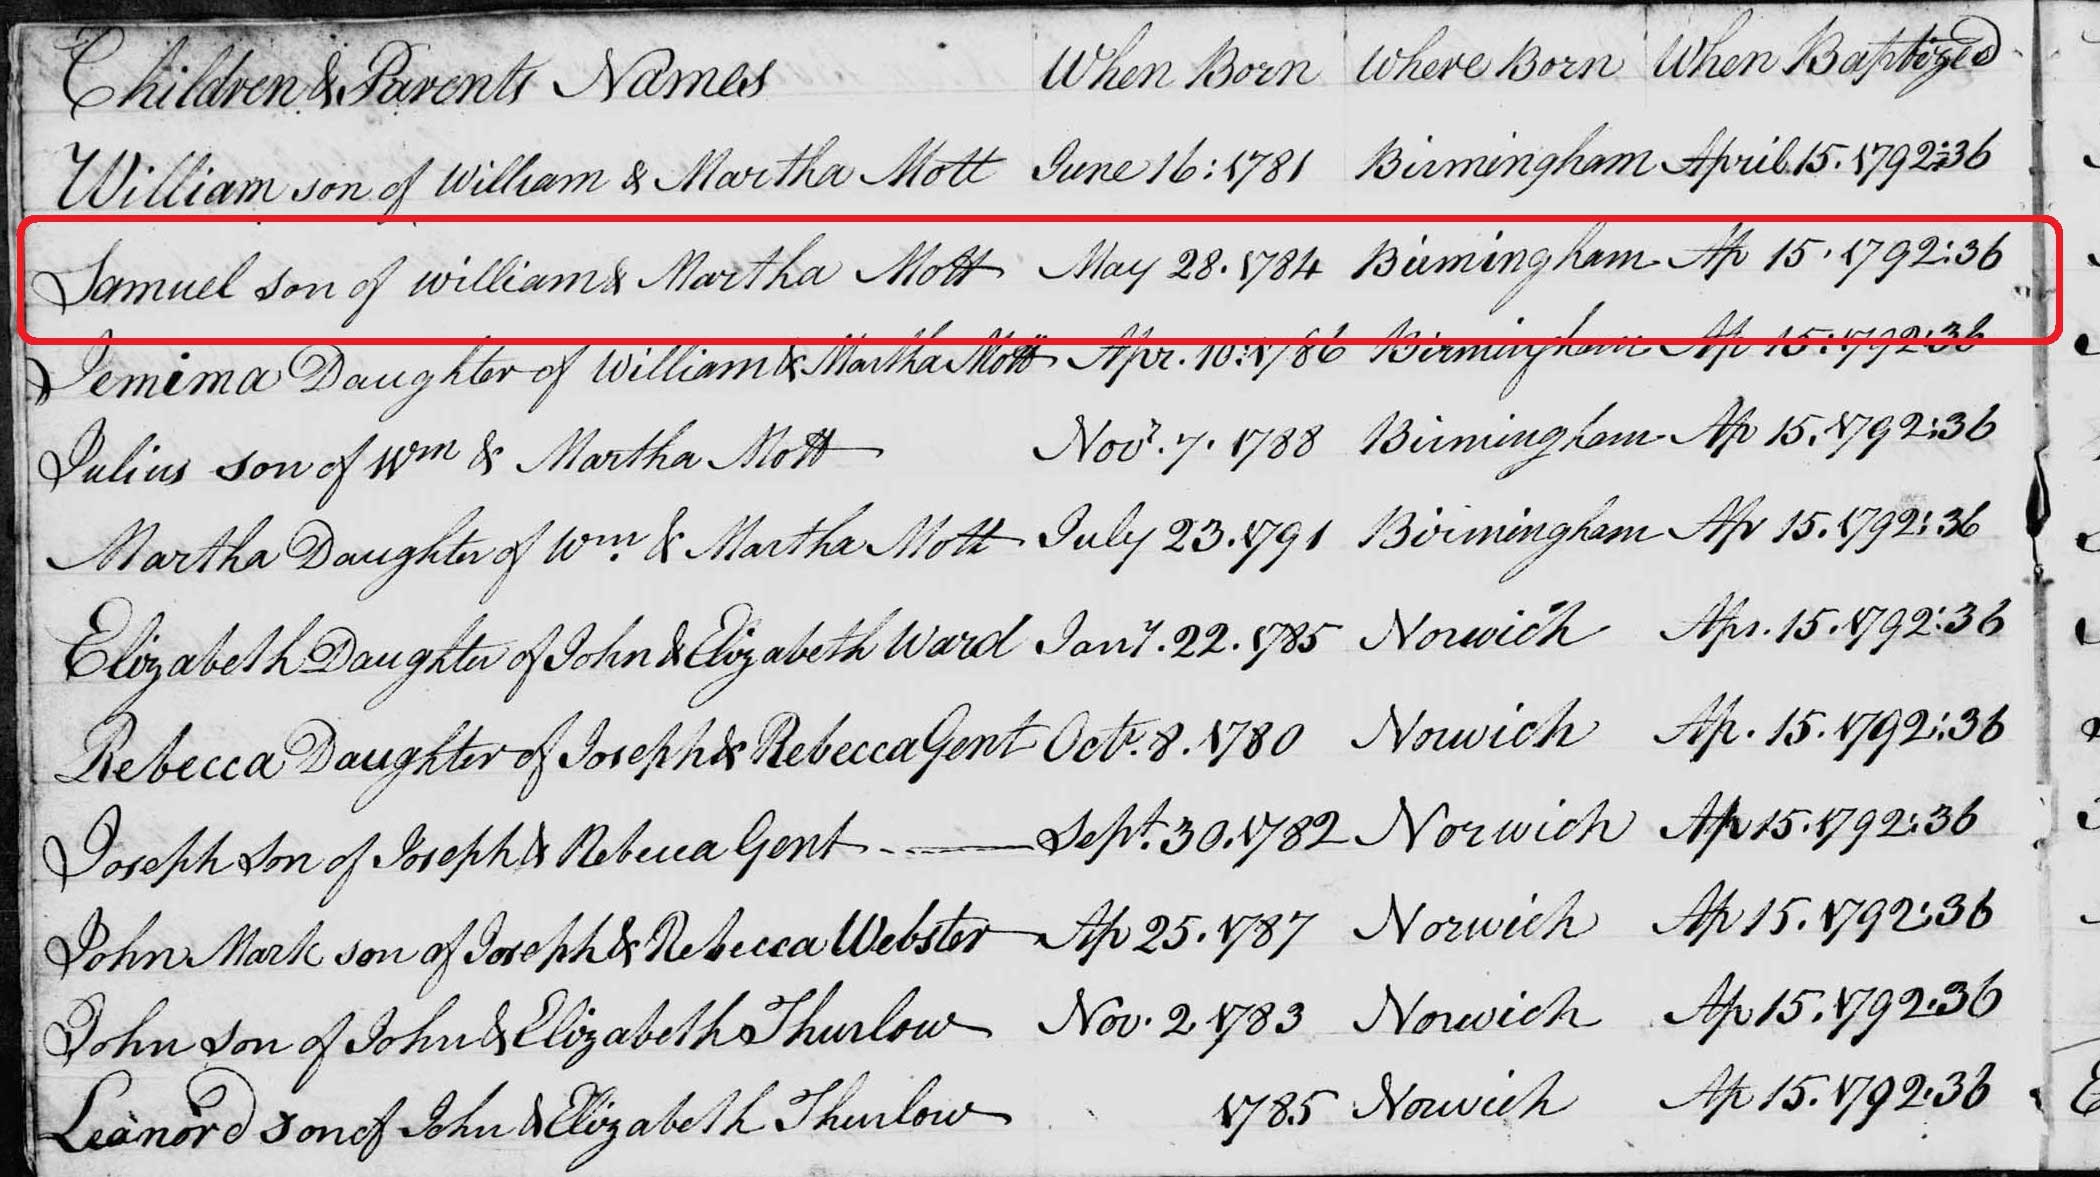 Samuel Mott in Non-parochial records (RG4) shows that he was born on May 28th, 1784 and baptised Apr 15 1792